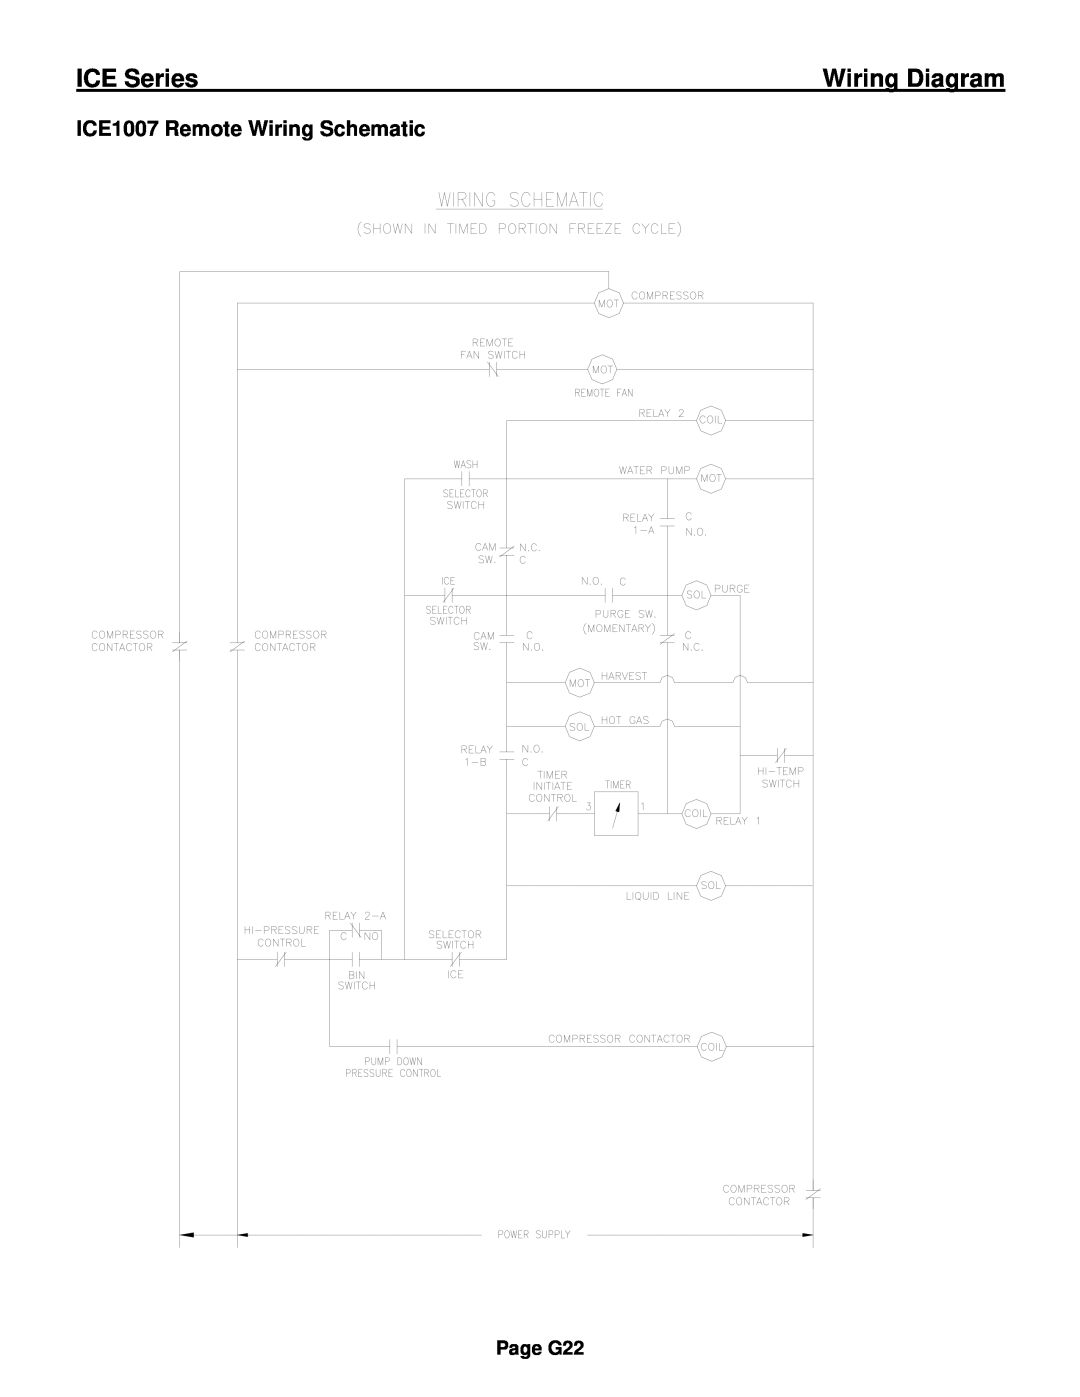 Ice-O-Matic ICE0250 Series installation manual ICE1007 Remote Wiring Schematic, ICE Series, Wiring Diagram, Page G22 